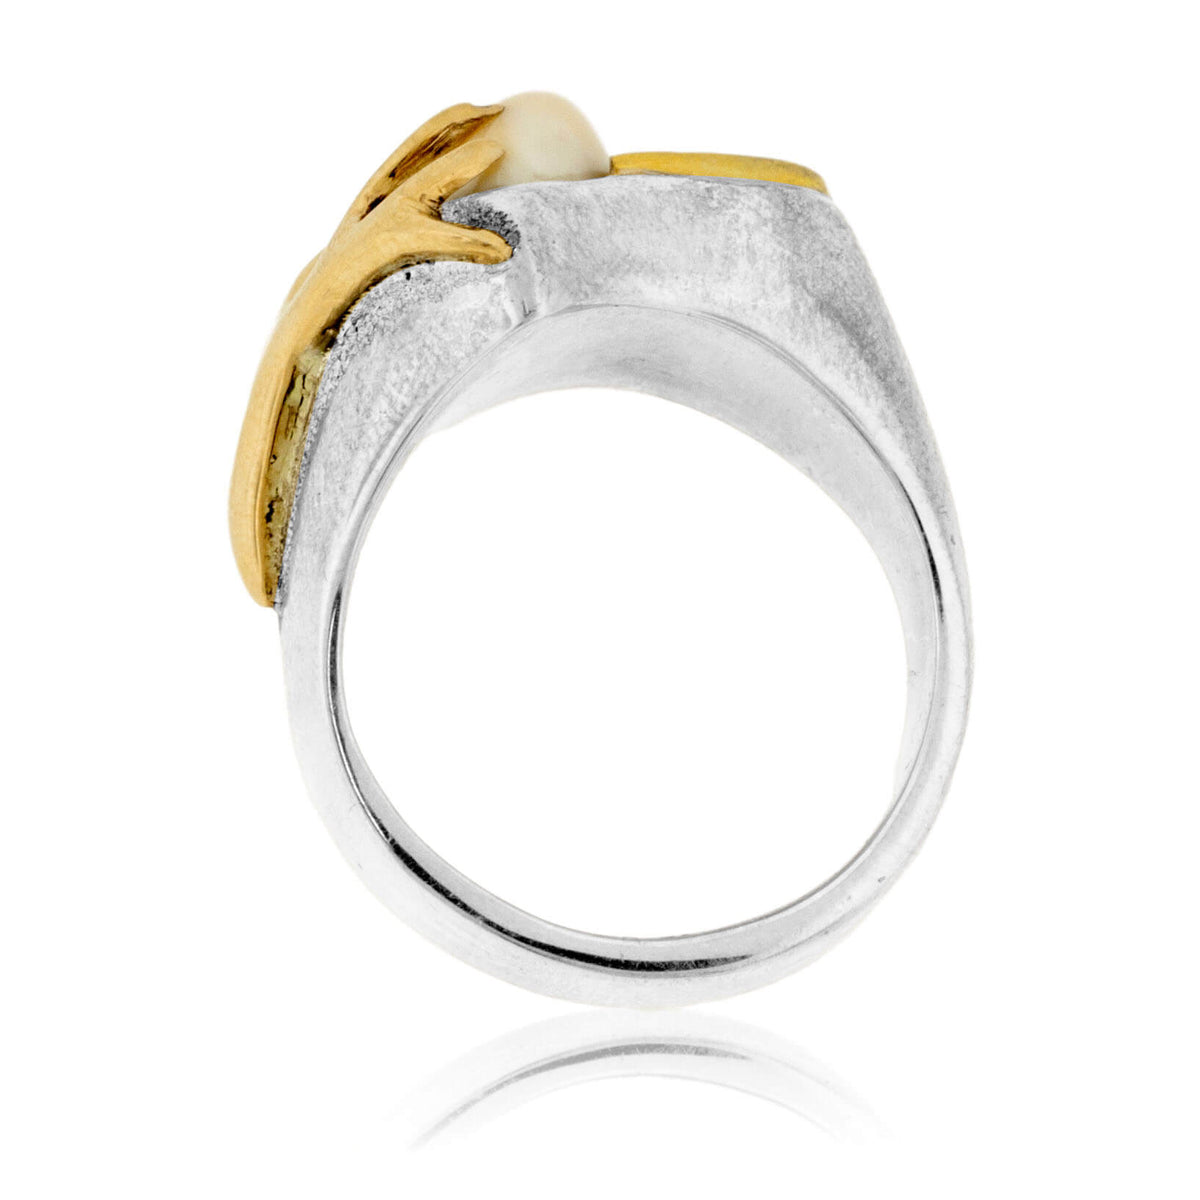 Elk Tooth Ivory Ring & Shell Casing Textured Style Ring - Park City Jewelers